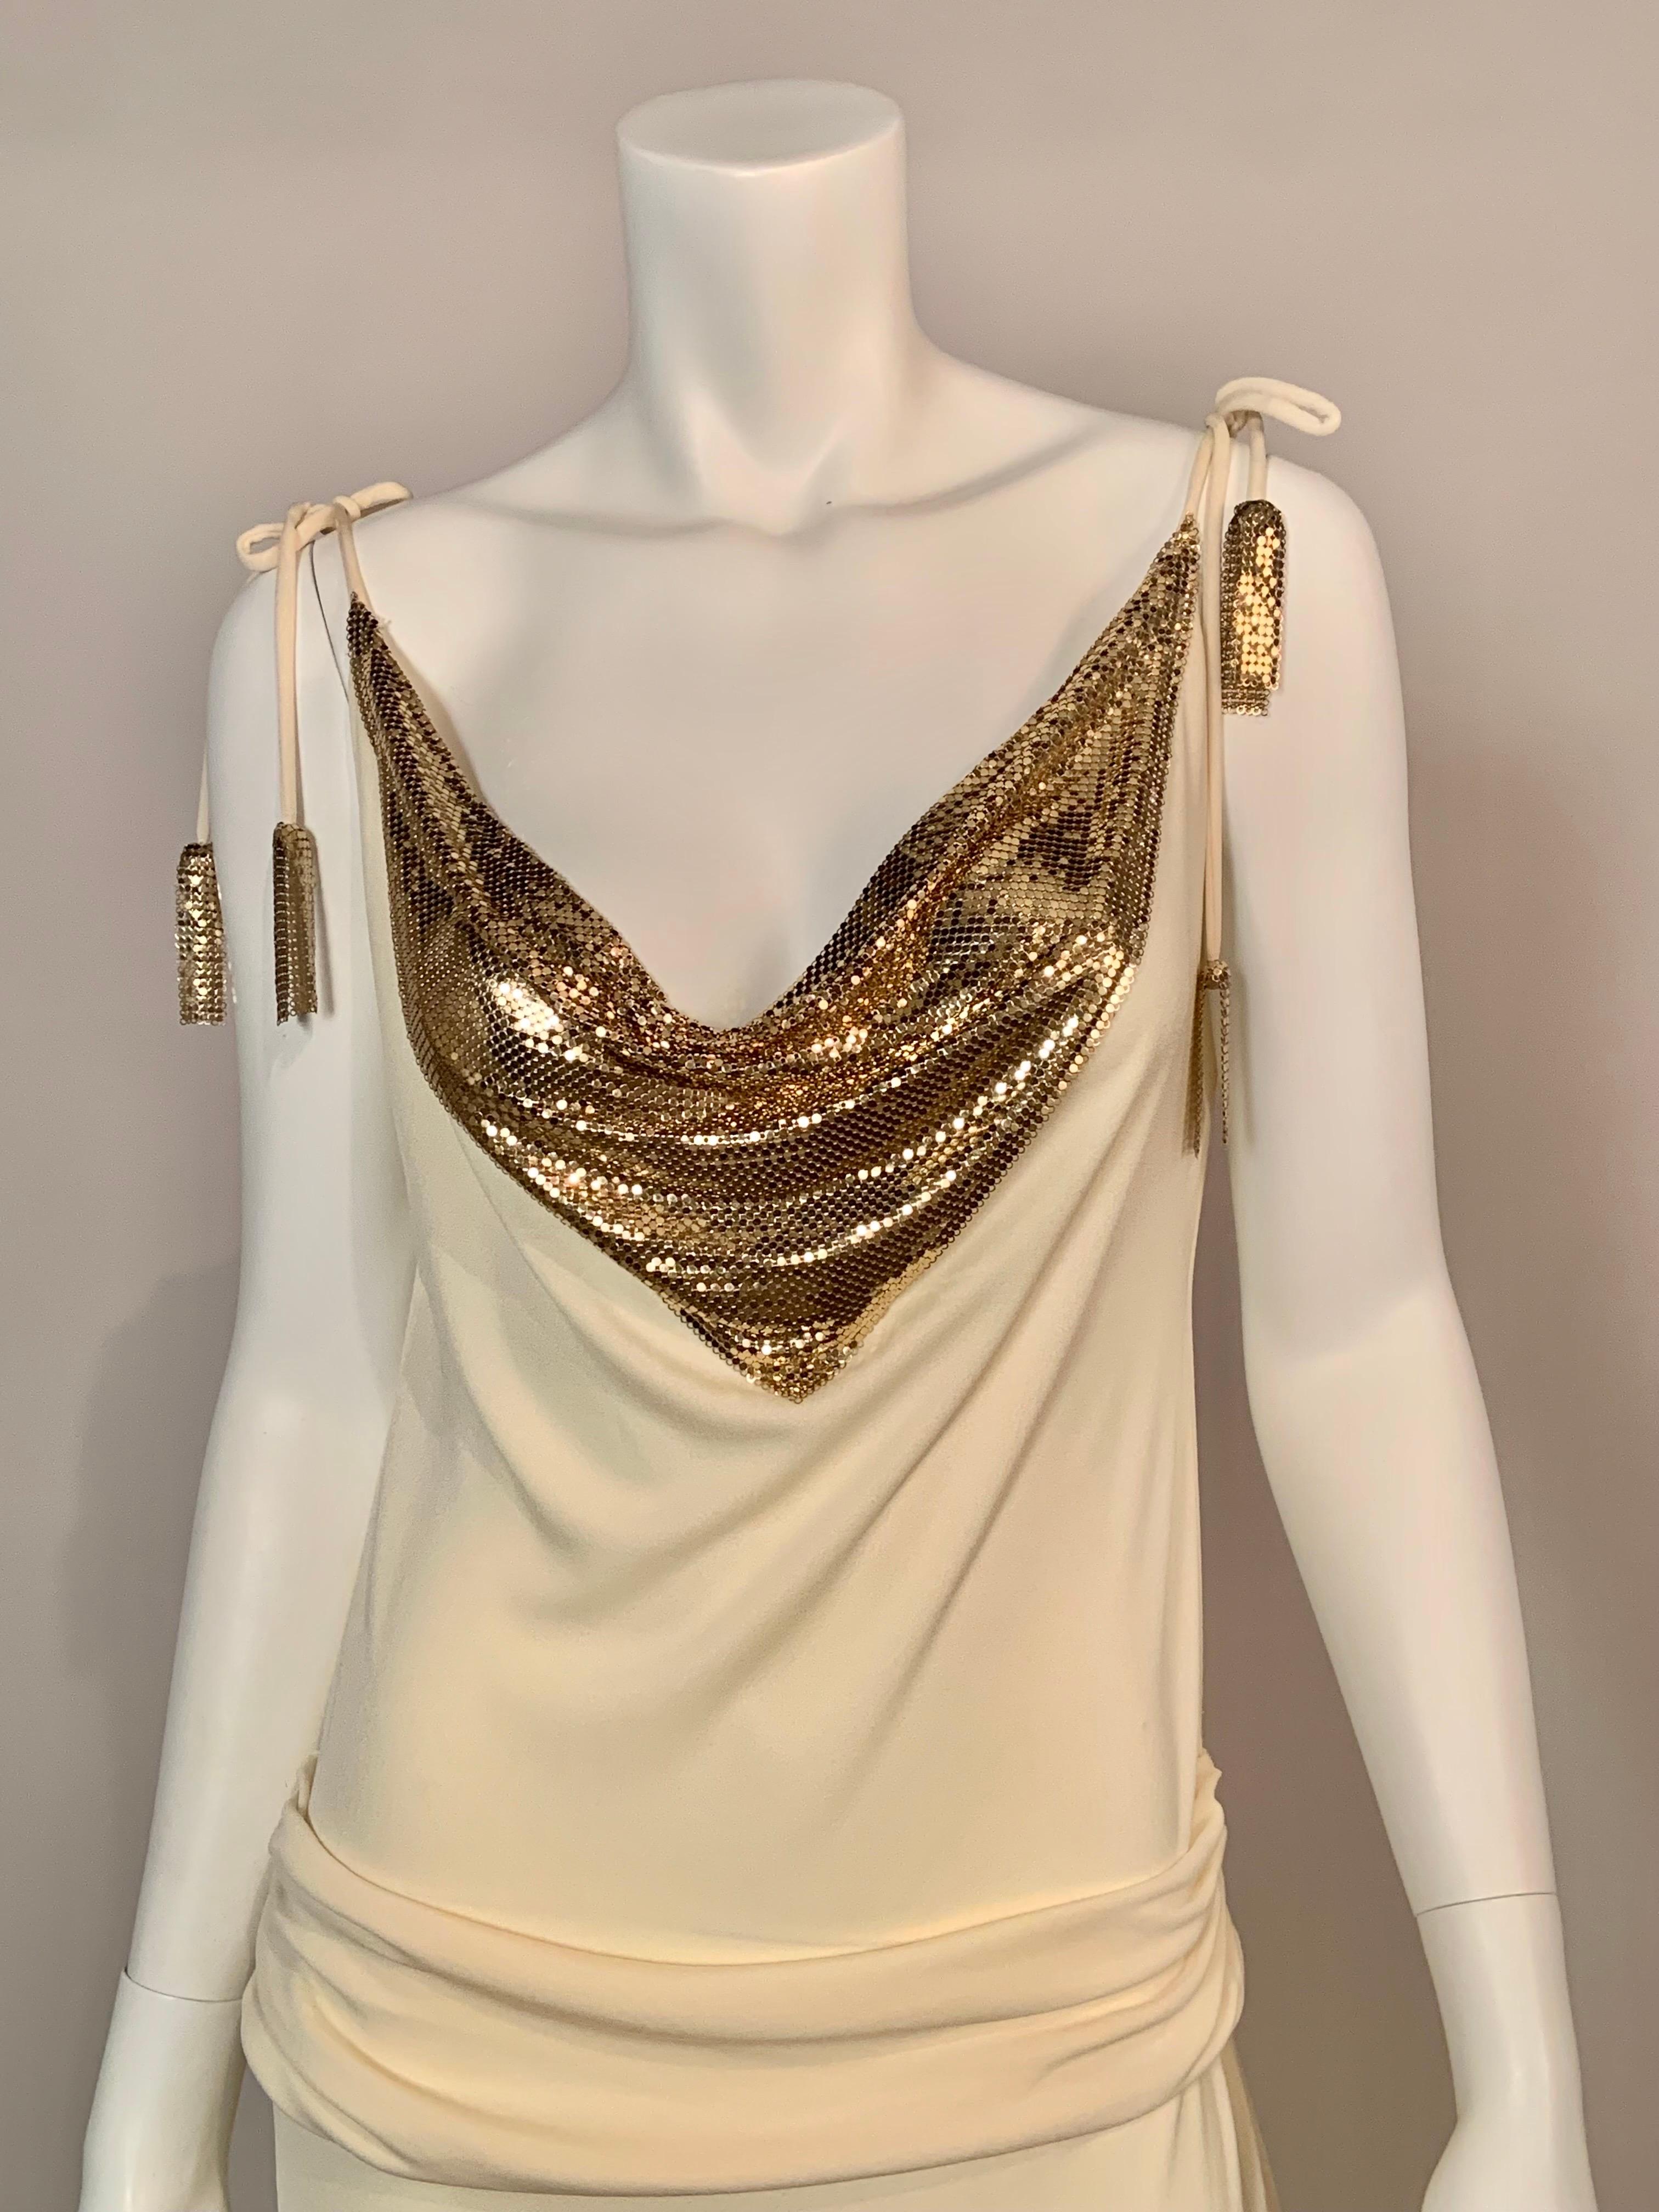 A glamourous cream jersey evening dress from the late 1980's is embellished with Whiting & Davis gold toned metal mesh at the neckline, both front and back.  The shoulder straps tie so you can adjust the fit. They are finished with Whiting & Davis